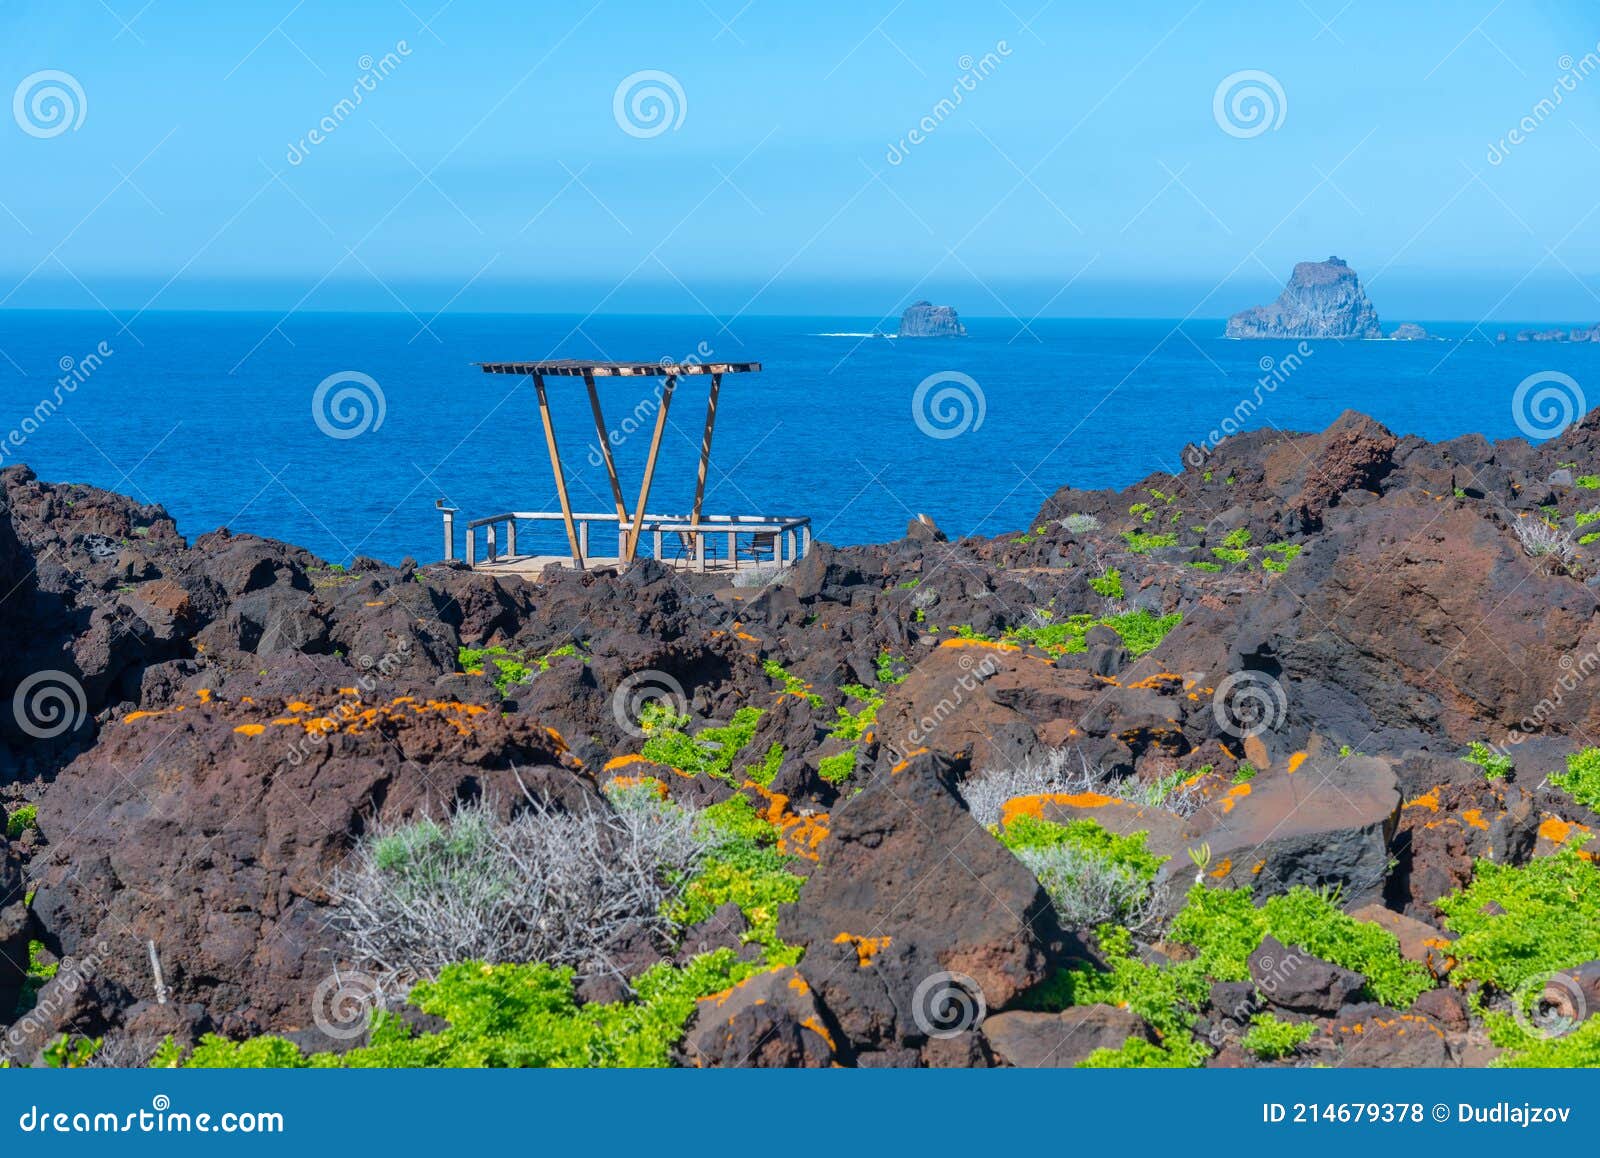 landscape of el hierro island viewed from a costal path connecting la maceta and punta grande, canary islands, spain